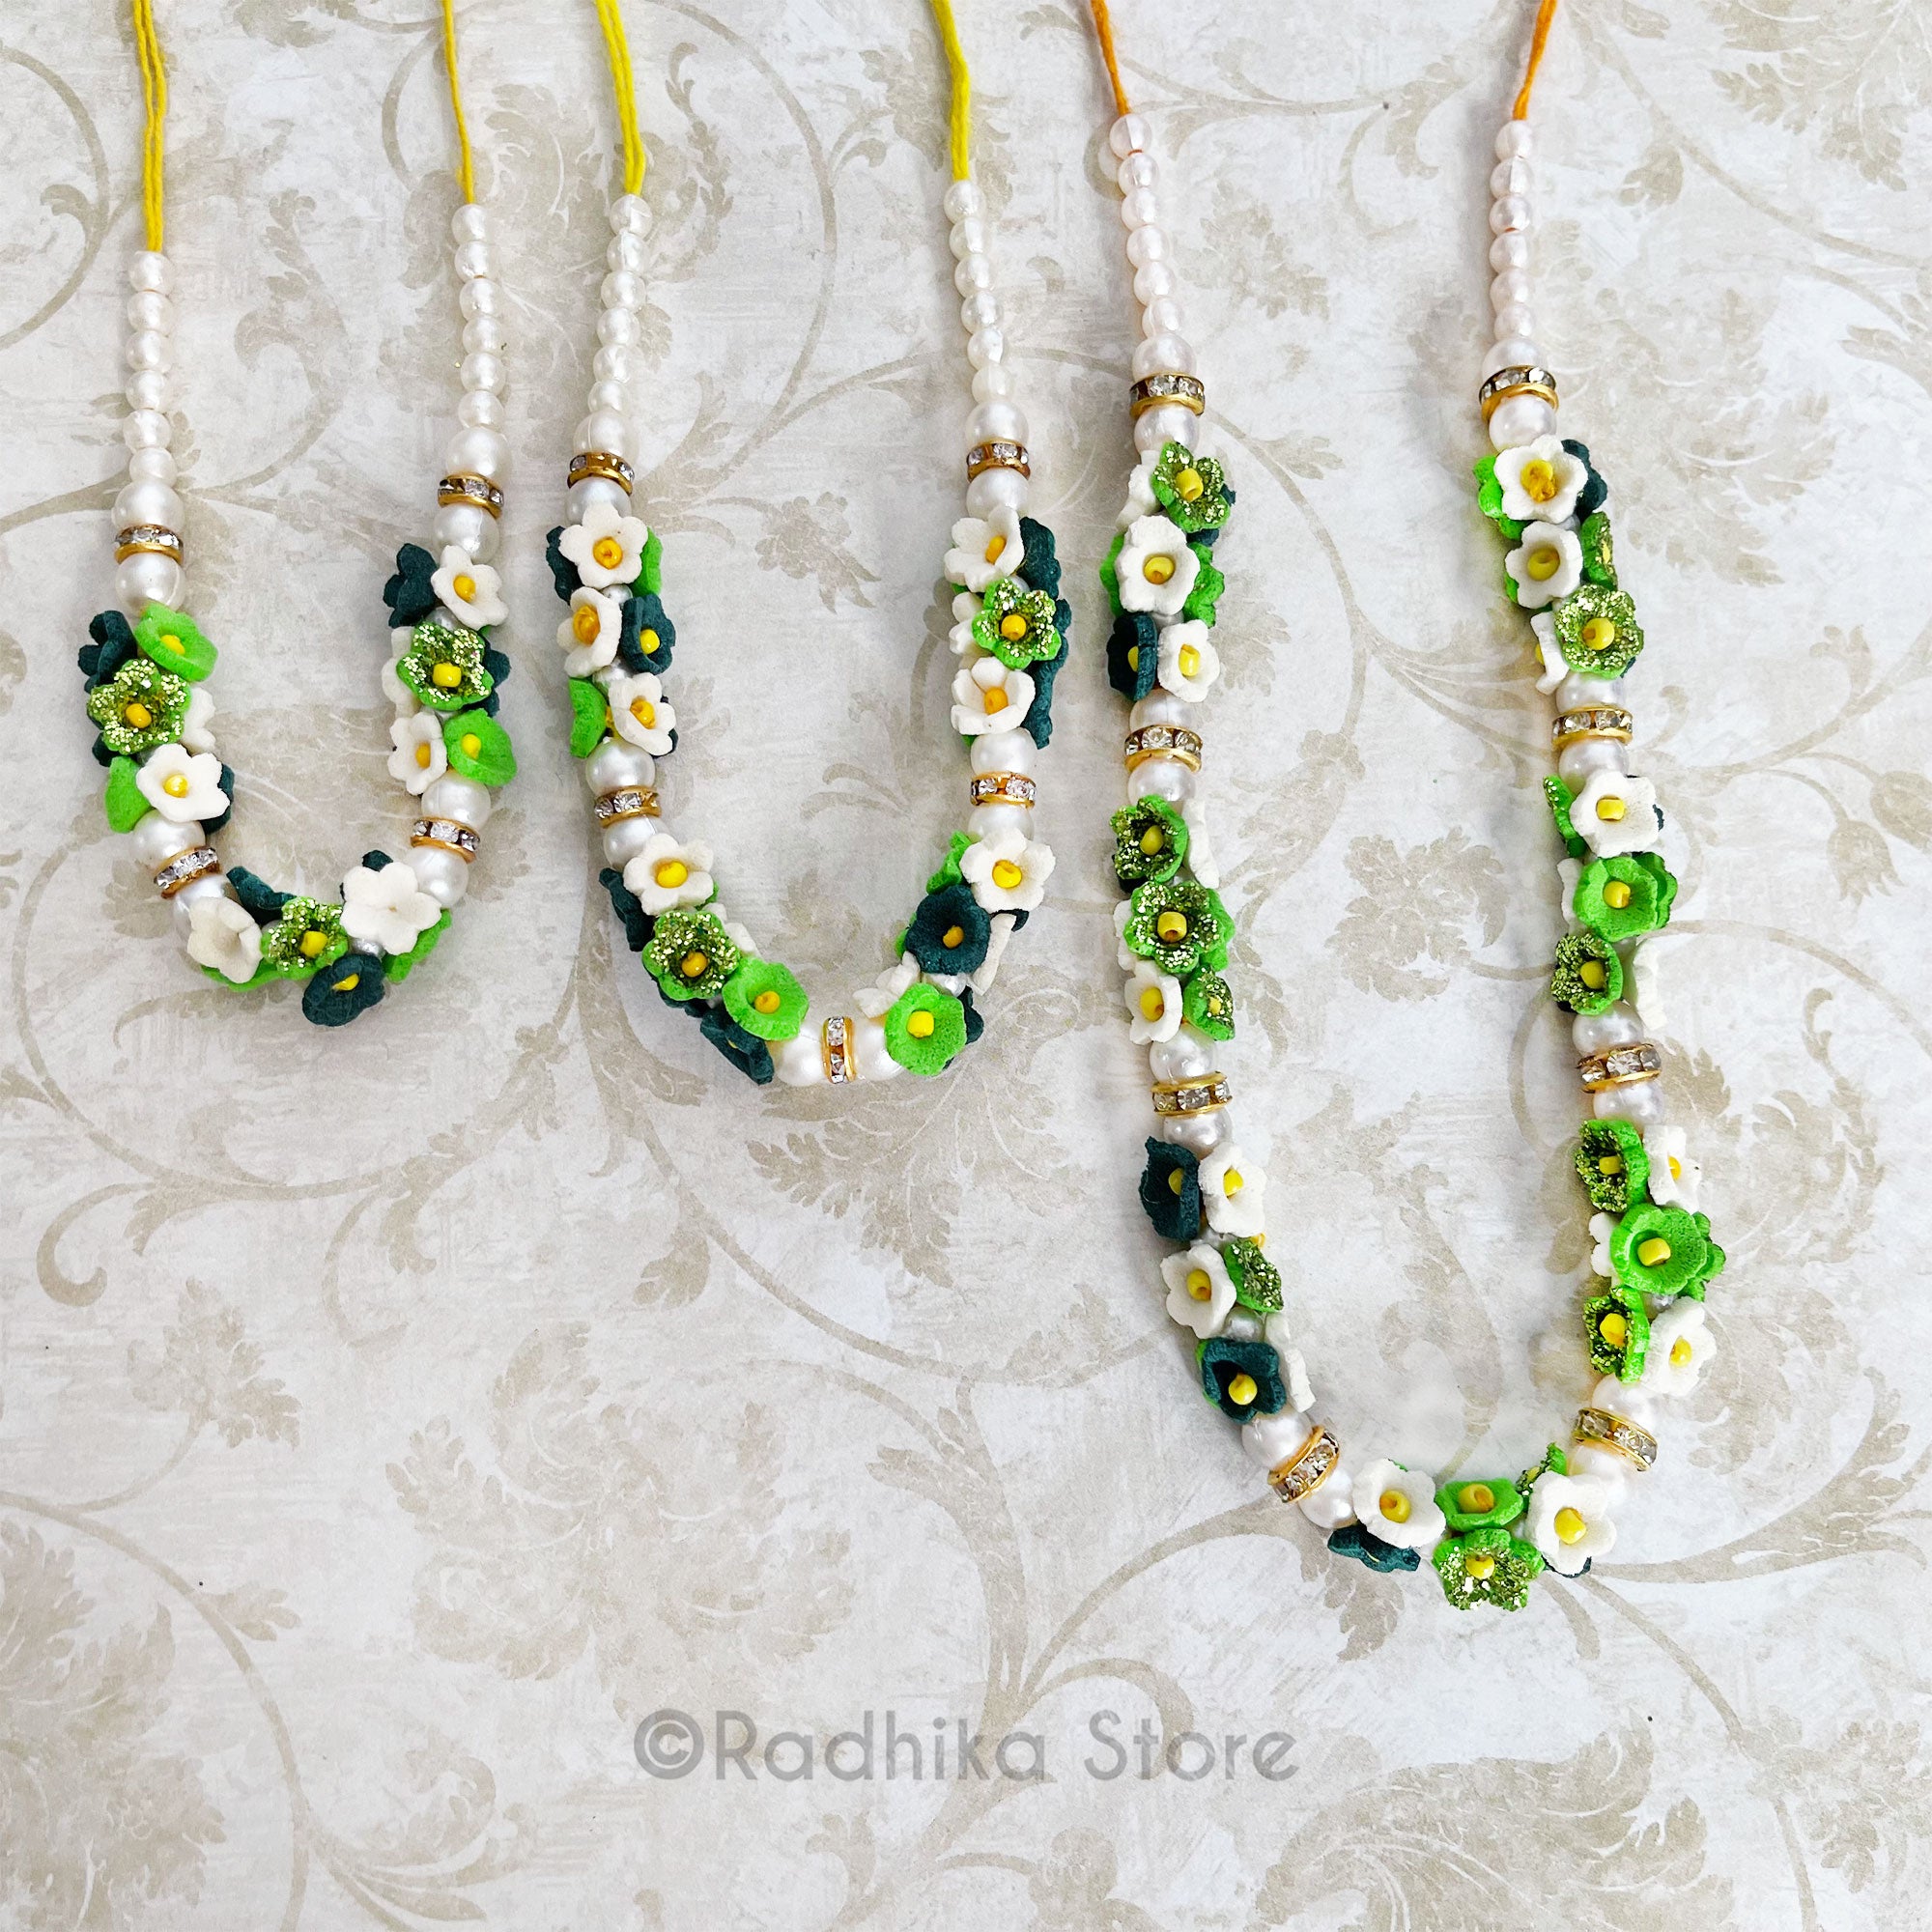 Green and White Seed Beads Mini Flowers Necklace By Hidayat